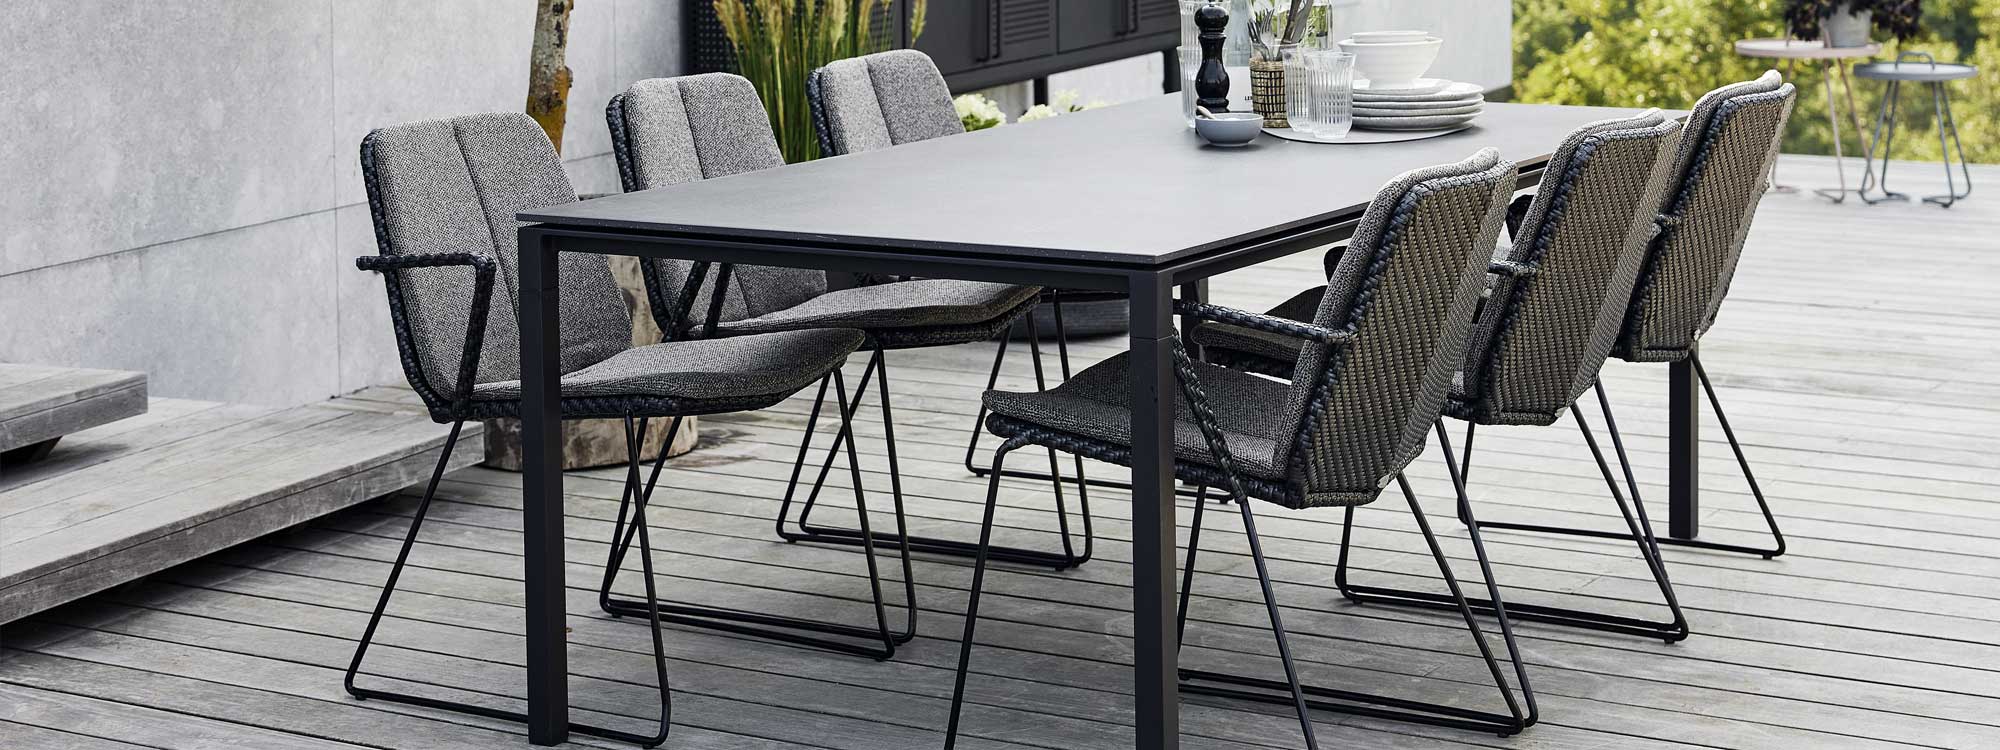 Image of Vision black rattan garden chairs and Pure ceramic dining table by Cane-line